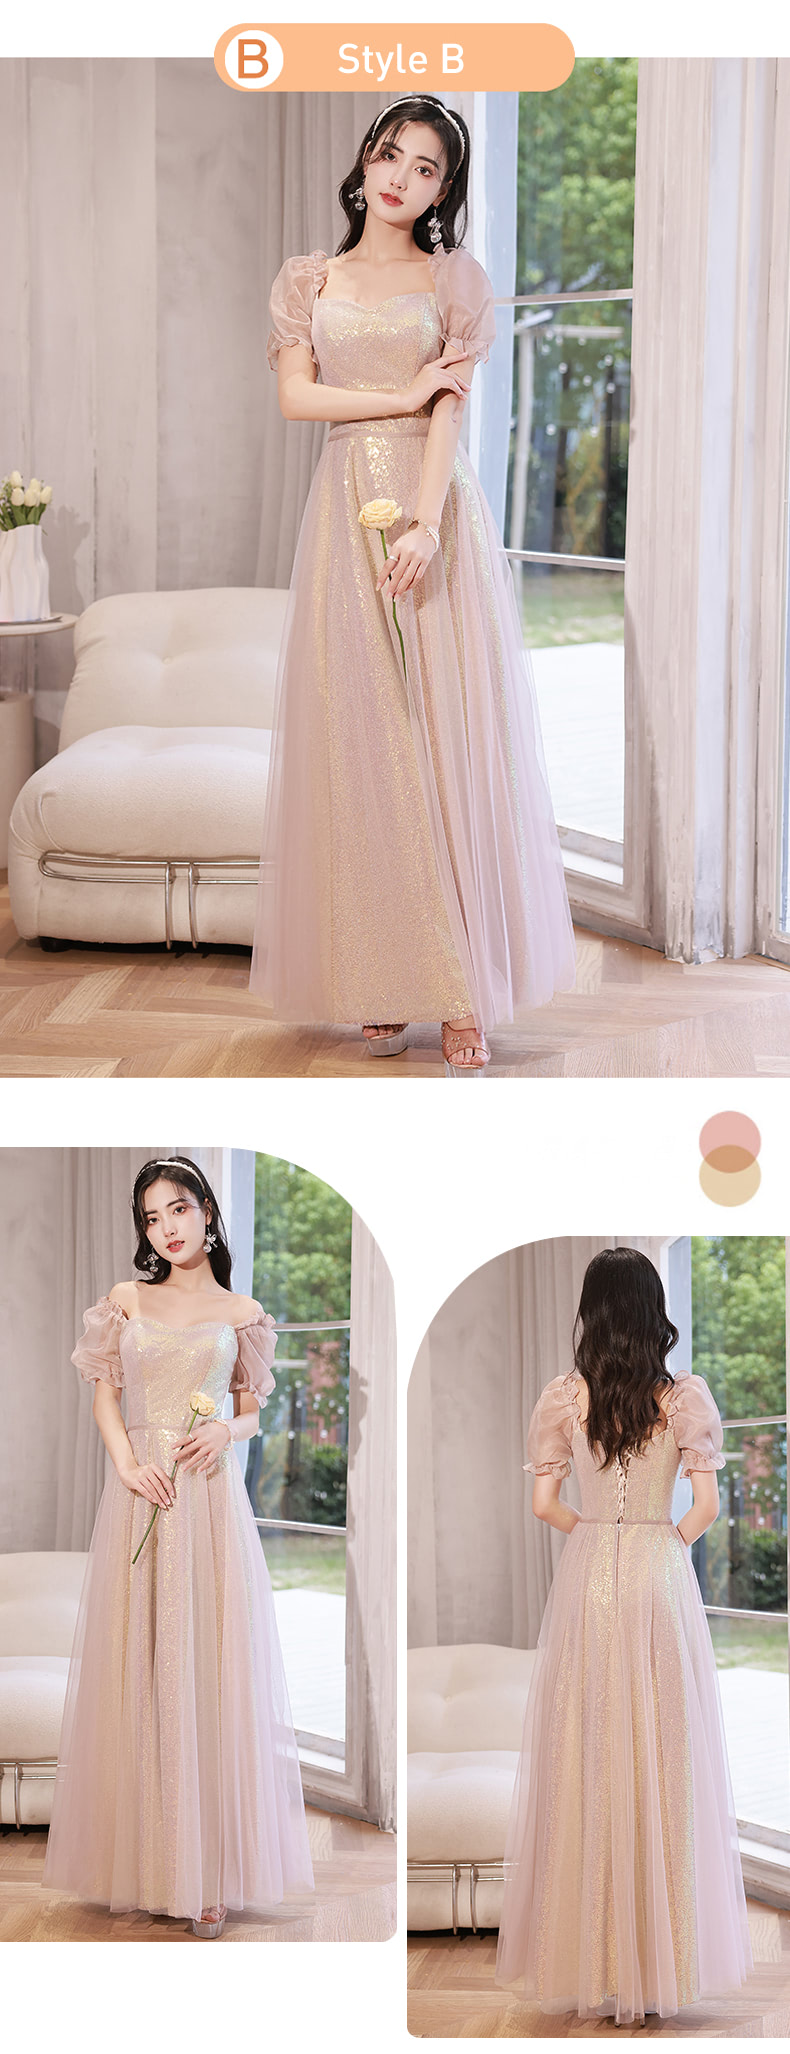 Fairy-Starry-Pink-Slim-Bridesmaid-Long-Dress-Wedding-Party-Gown16.jpg